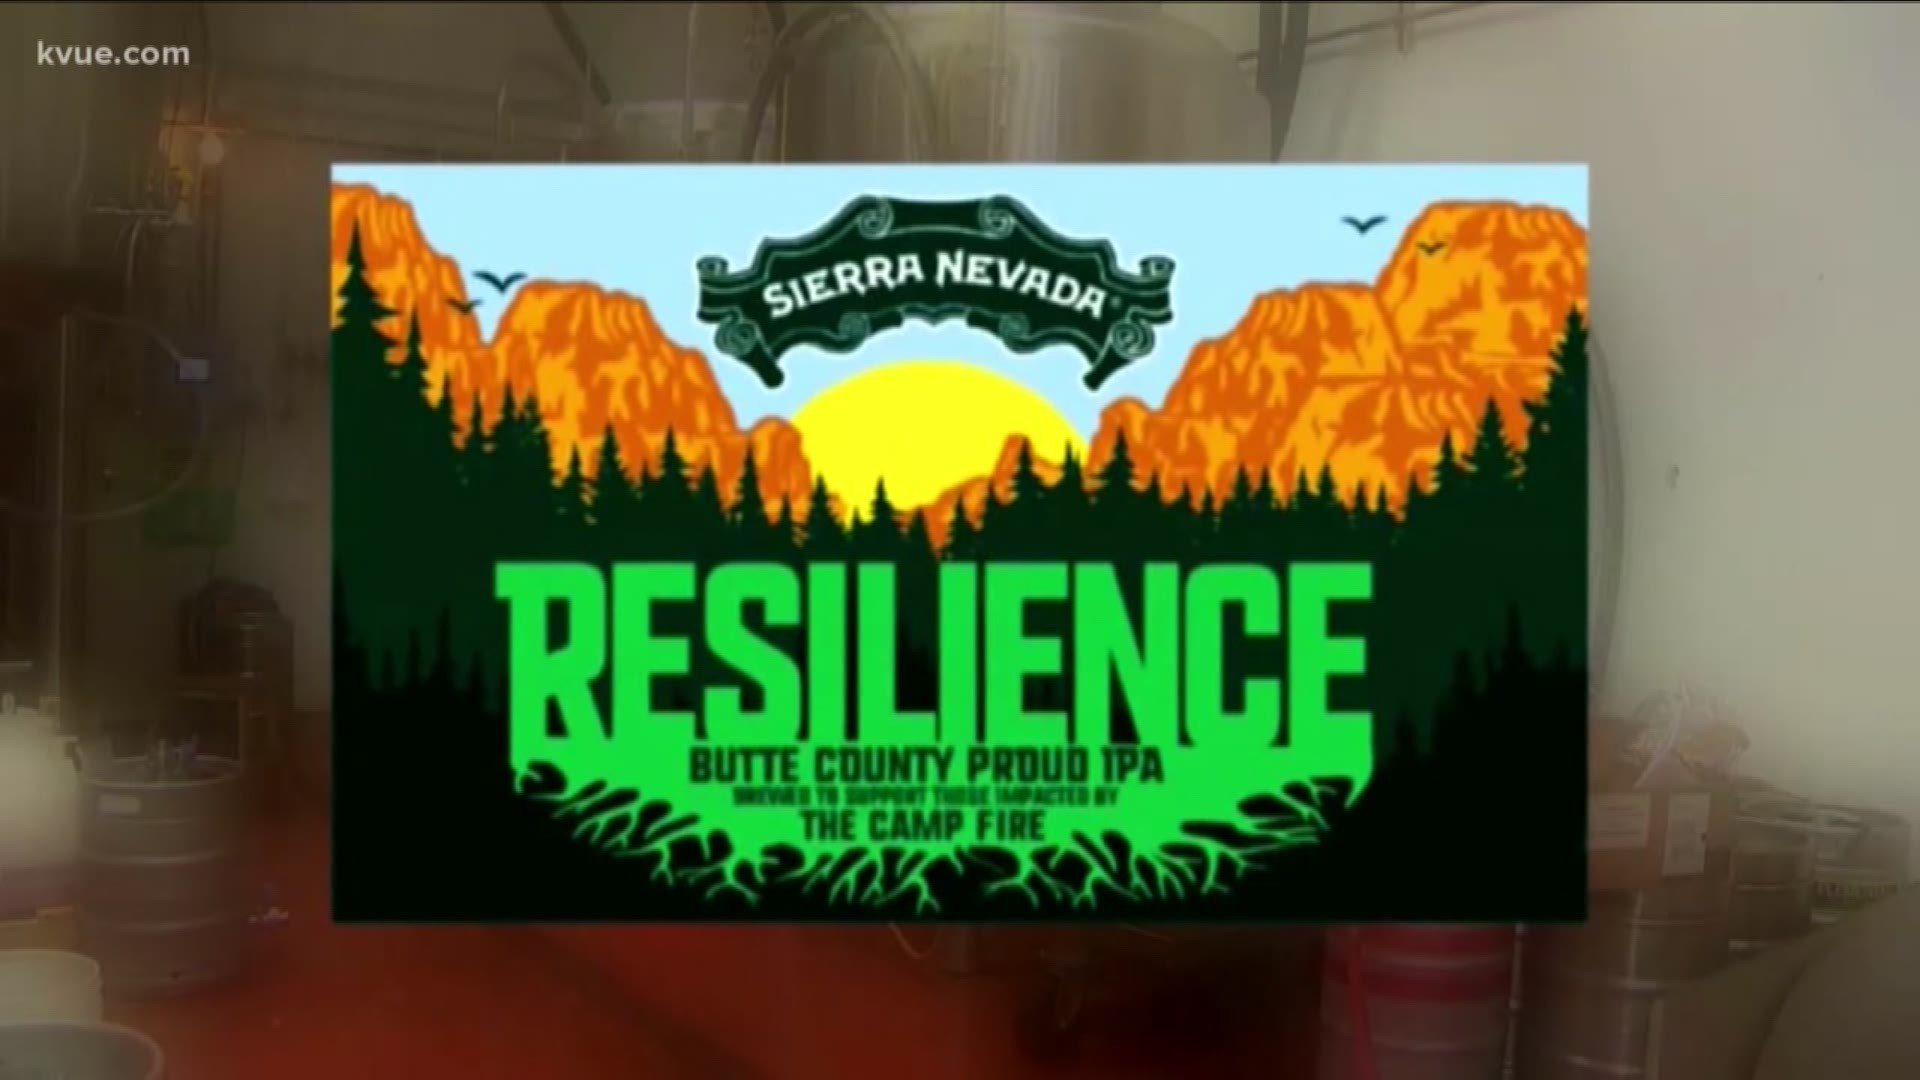 Beer companies across the country, including here in Central Texas, are brewing a special beer to help the victims of the California wildfires.